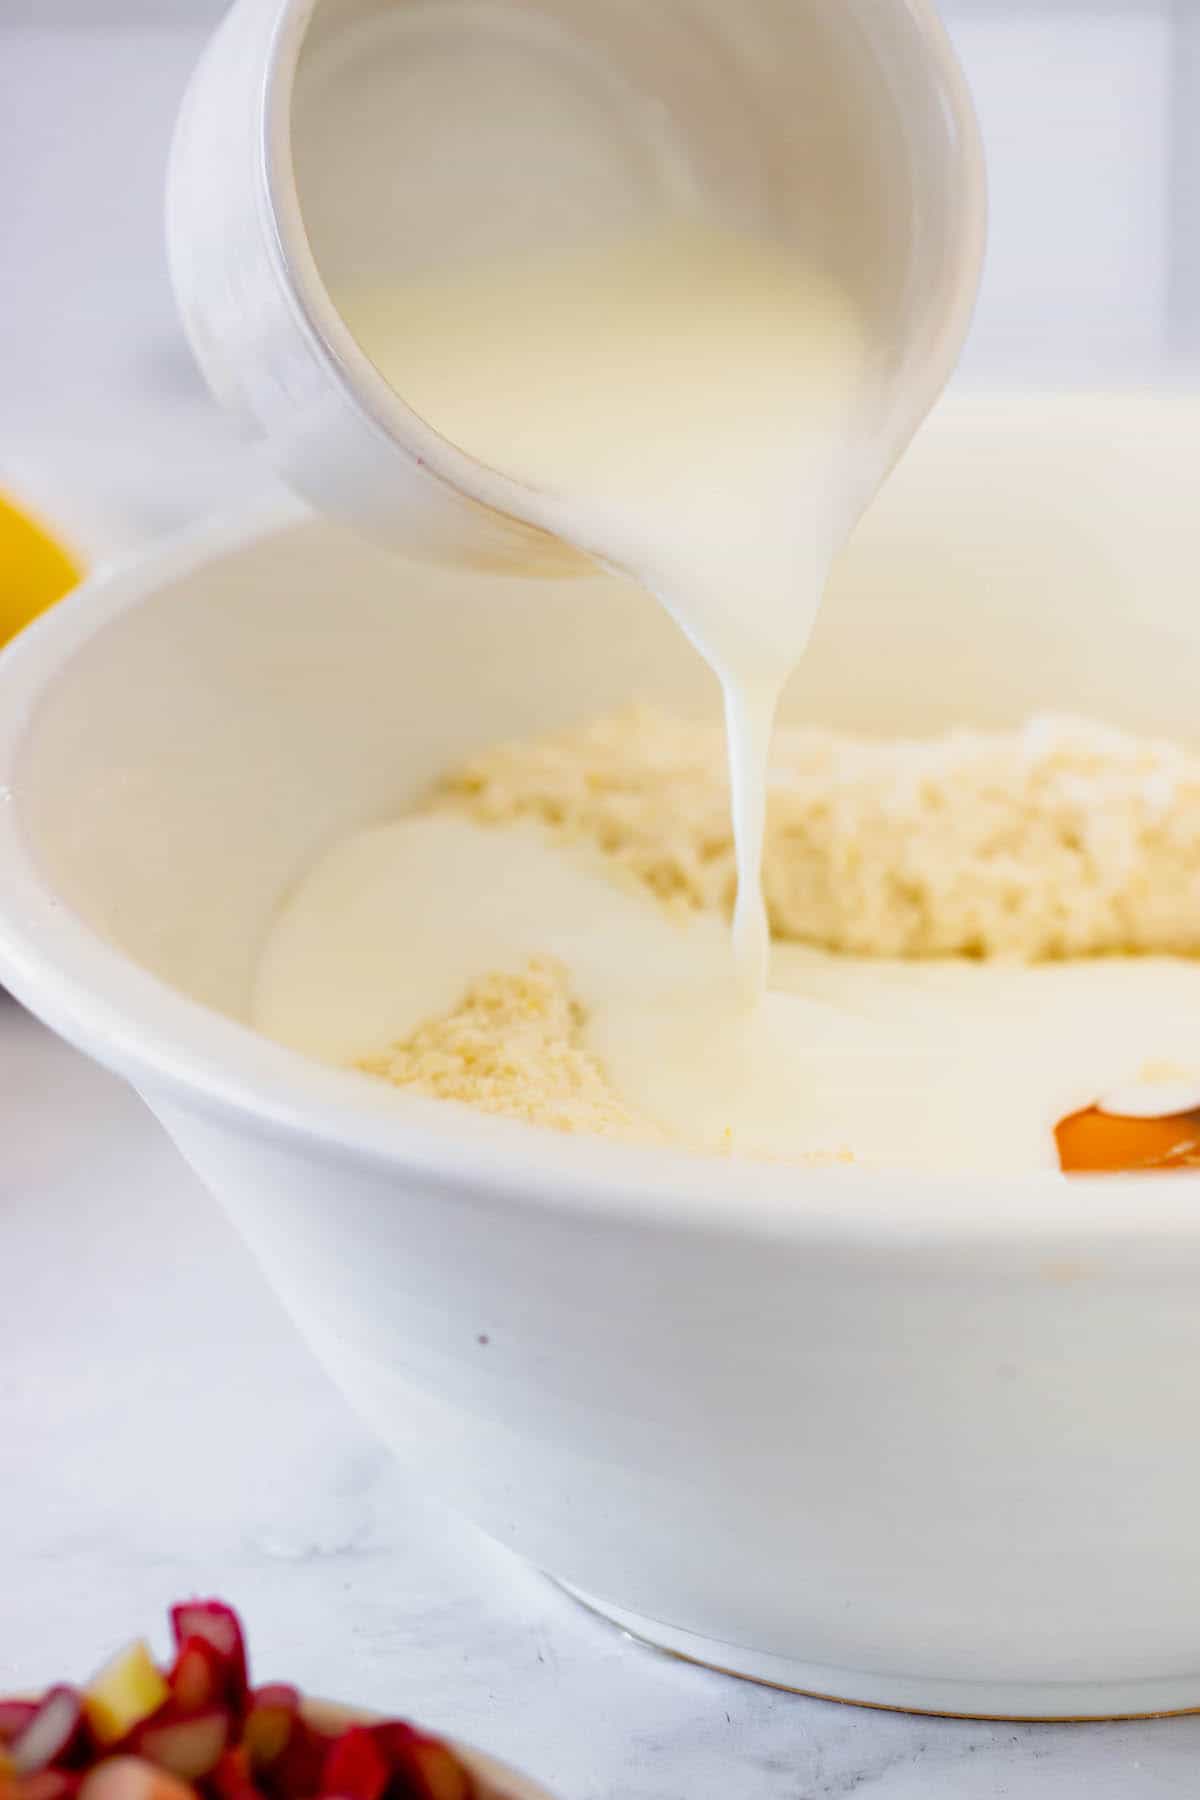 Milk being poured into a white mixing bowl